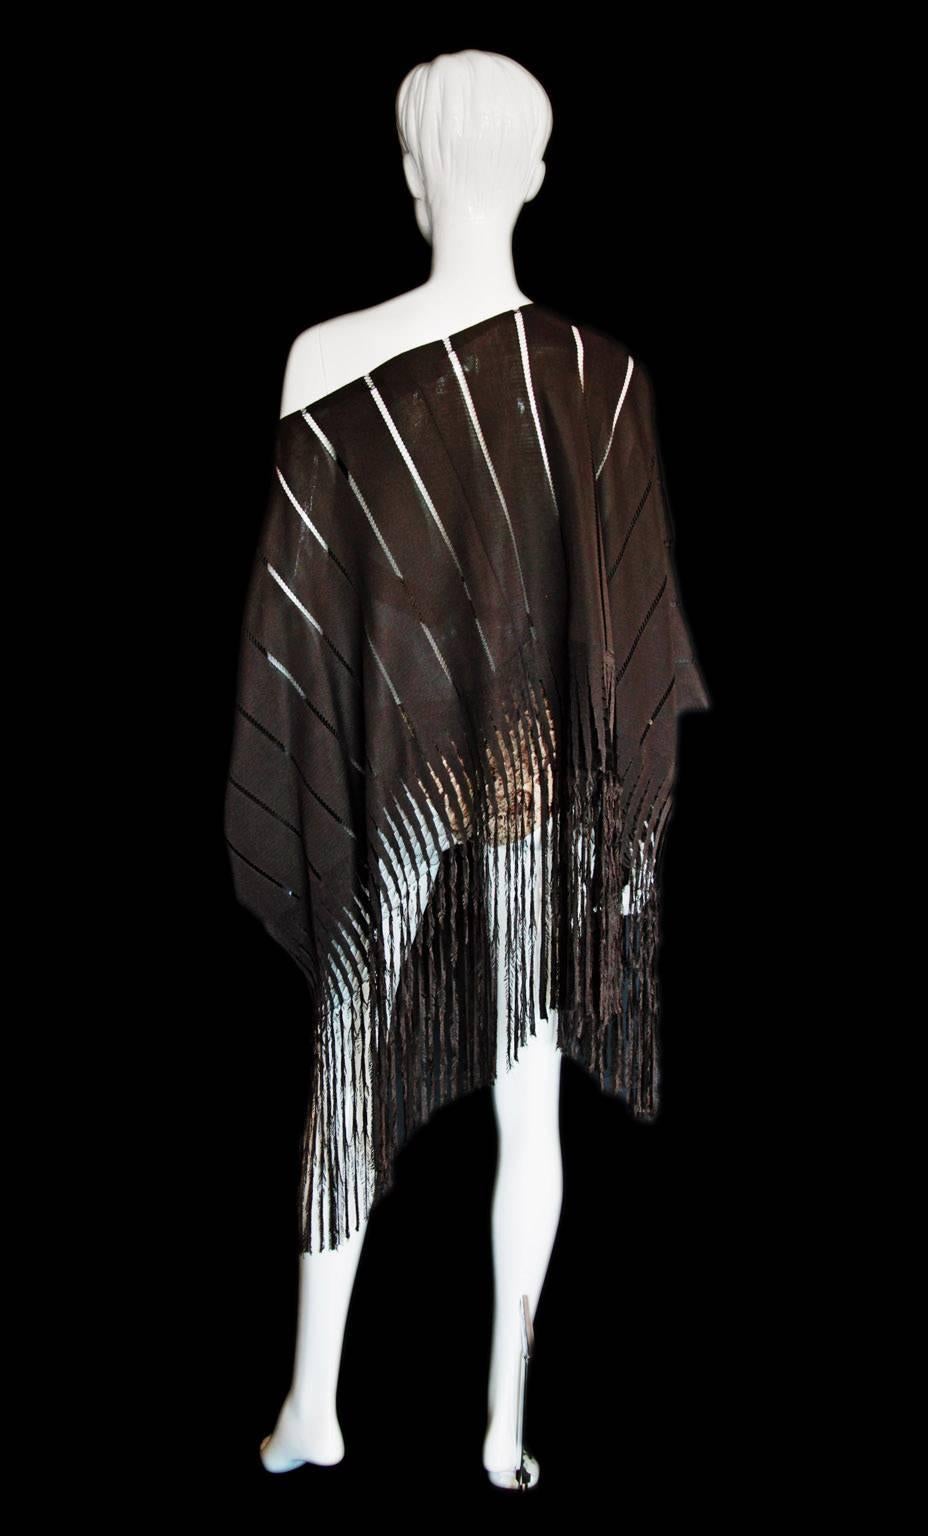 Women's Iconic Tom Ford YSL Rive Gauche SS2002 Safari Collection Chocolate Brown Poncho!